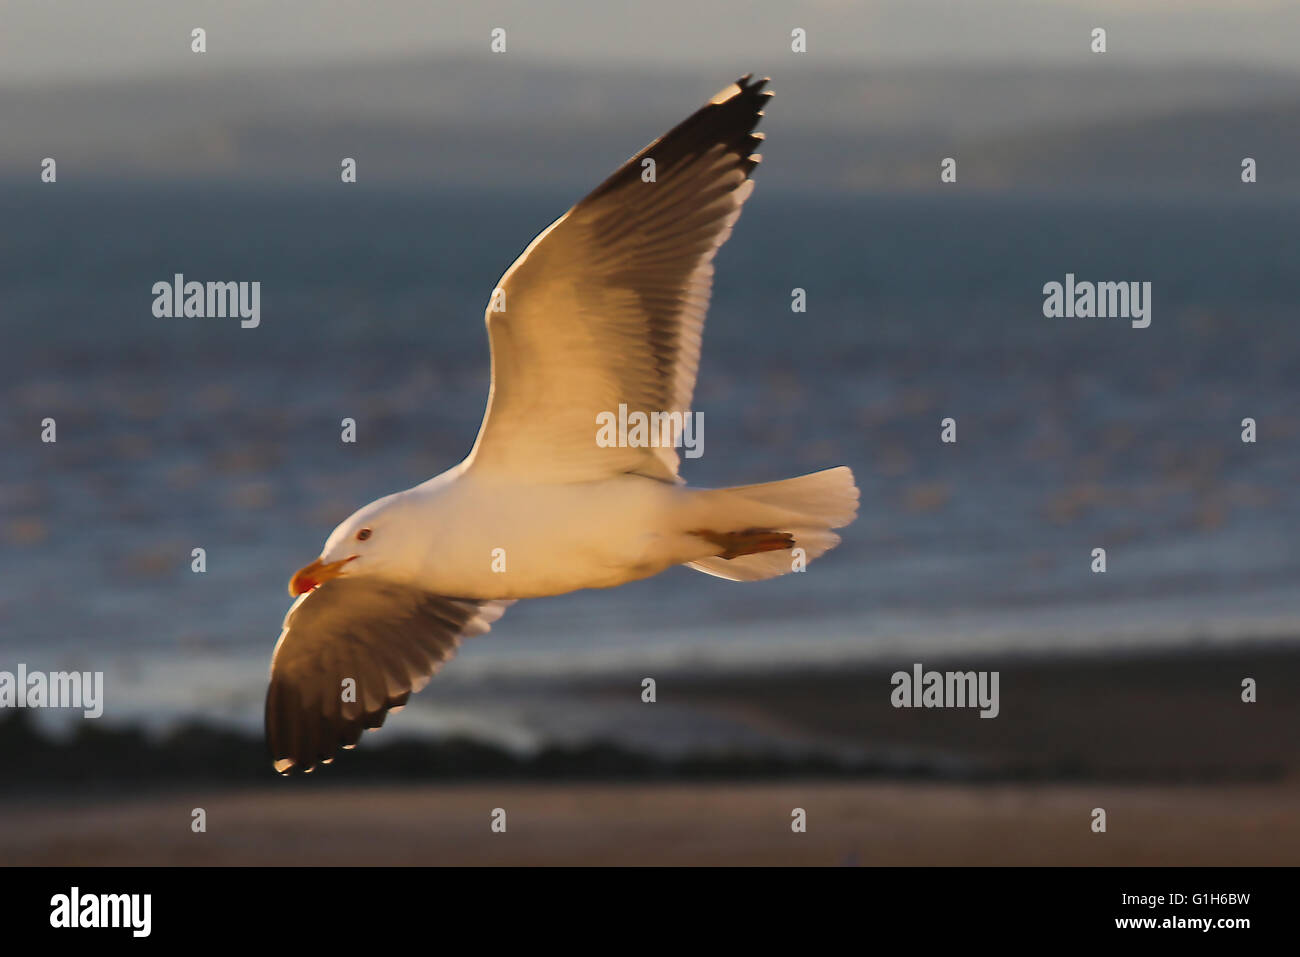 Morecambe Bay, United Kingdom 15th May 2015.  A gull on the wing photographed in the light of the setting sun over  Morecambe Bay Credit:  David Billinge/Alamy Live News Stock Photo